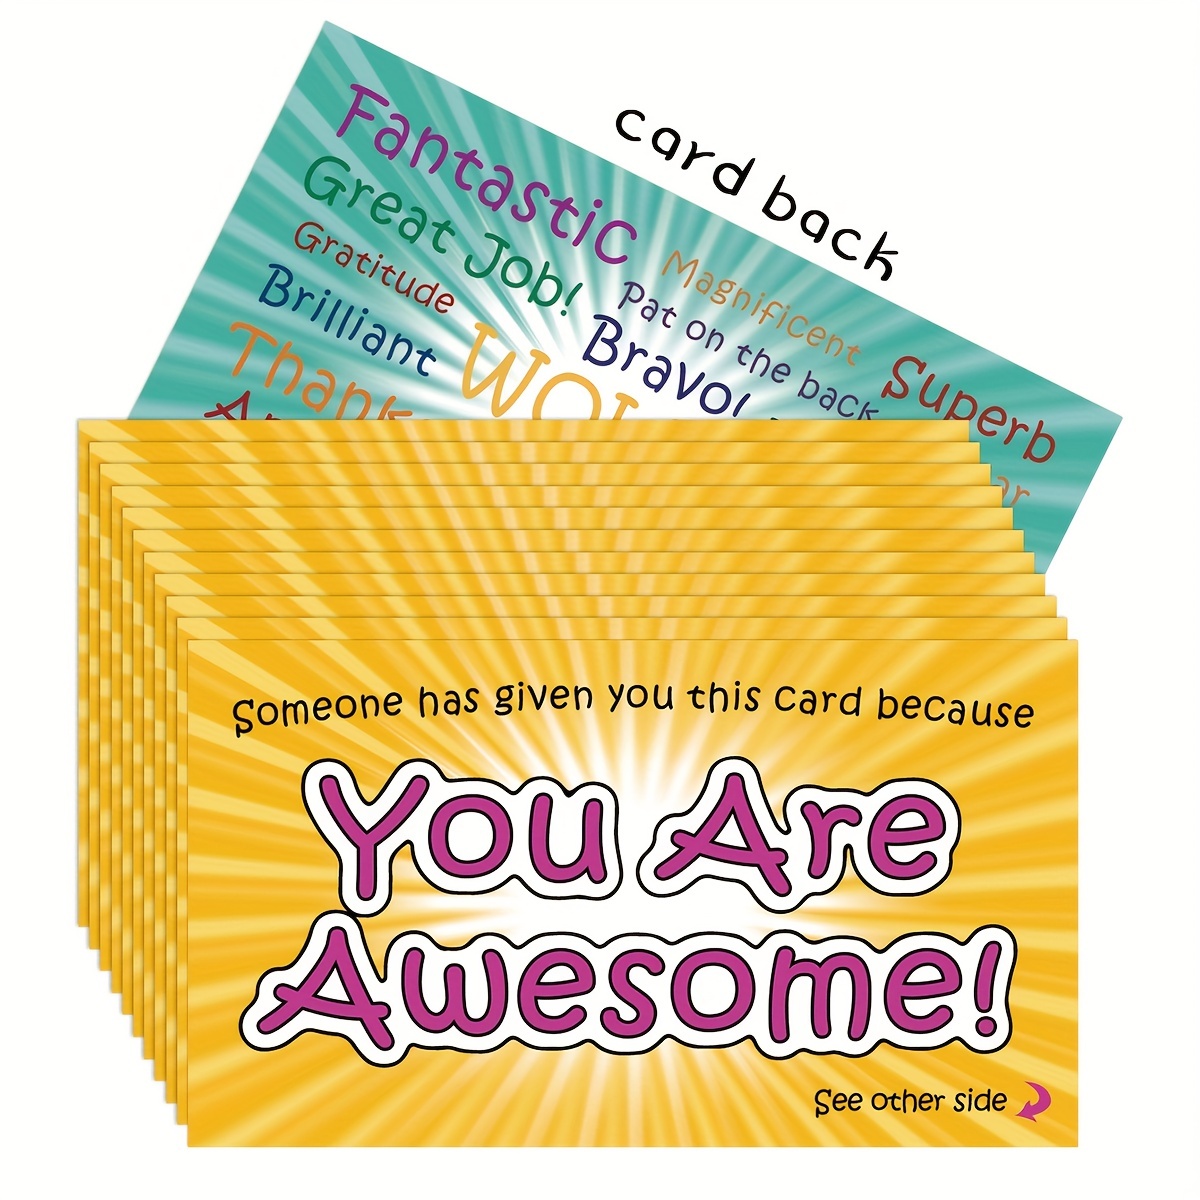 

50pcs You Are Awesome Cards - Appreciation Cards For Students, Teachers, Employers, Friends, Co-workers, Family